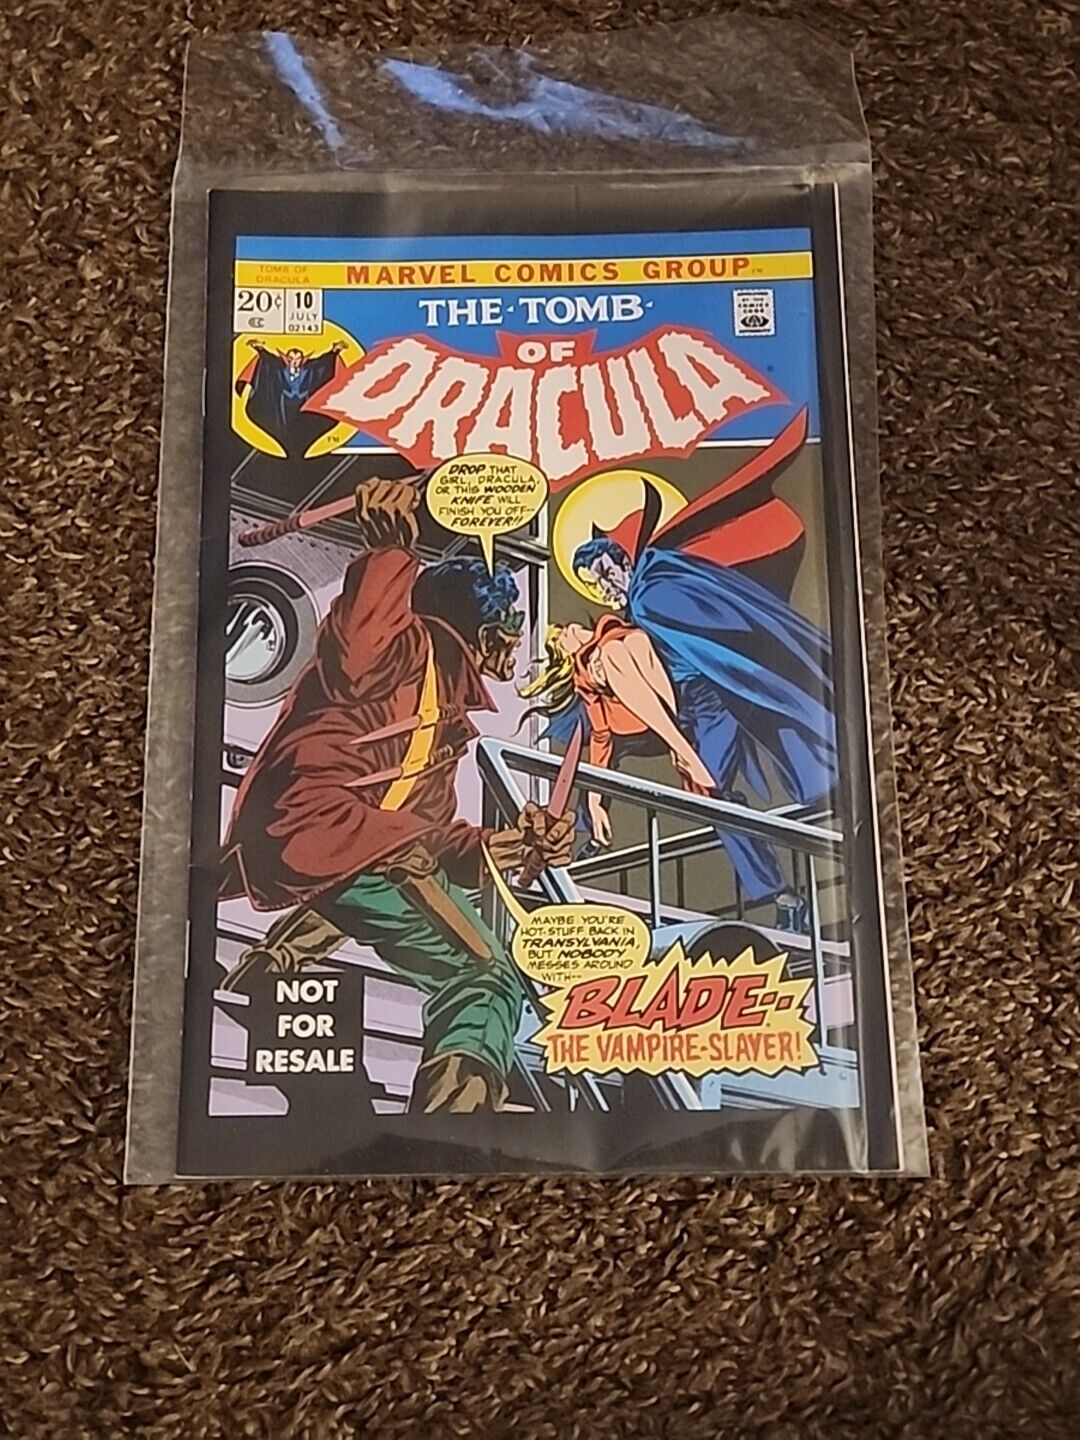 MARVEL Comic Book The-Tomb Of DRACULA